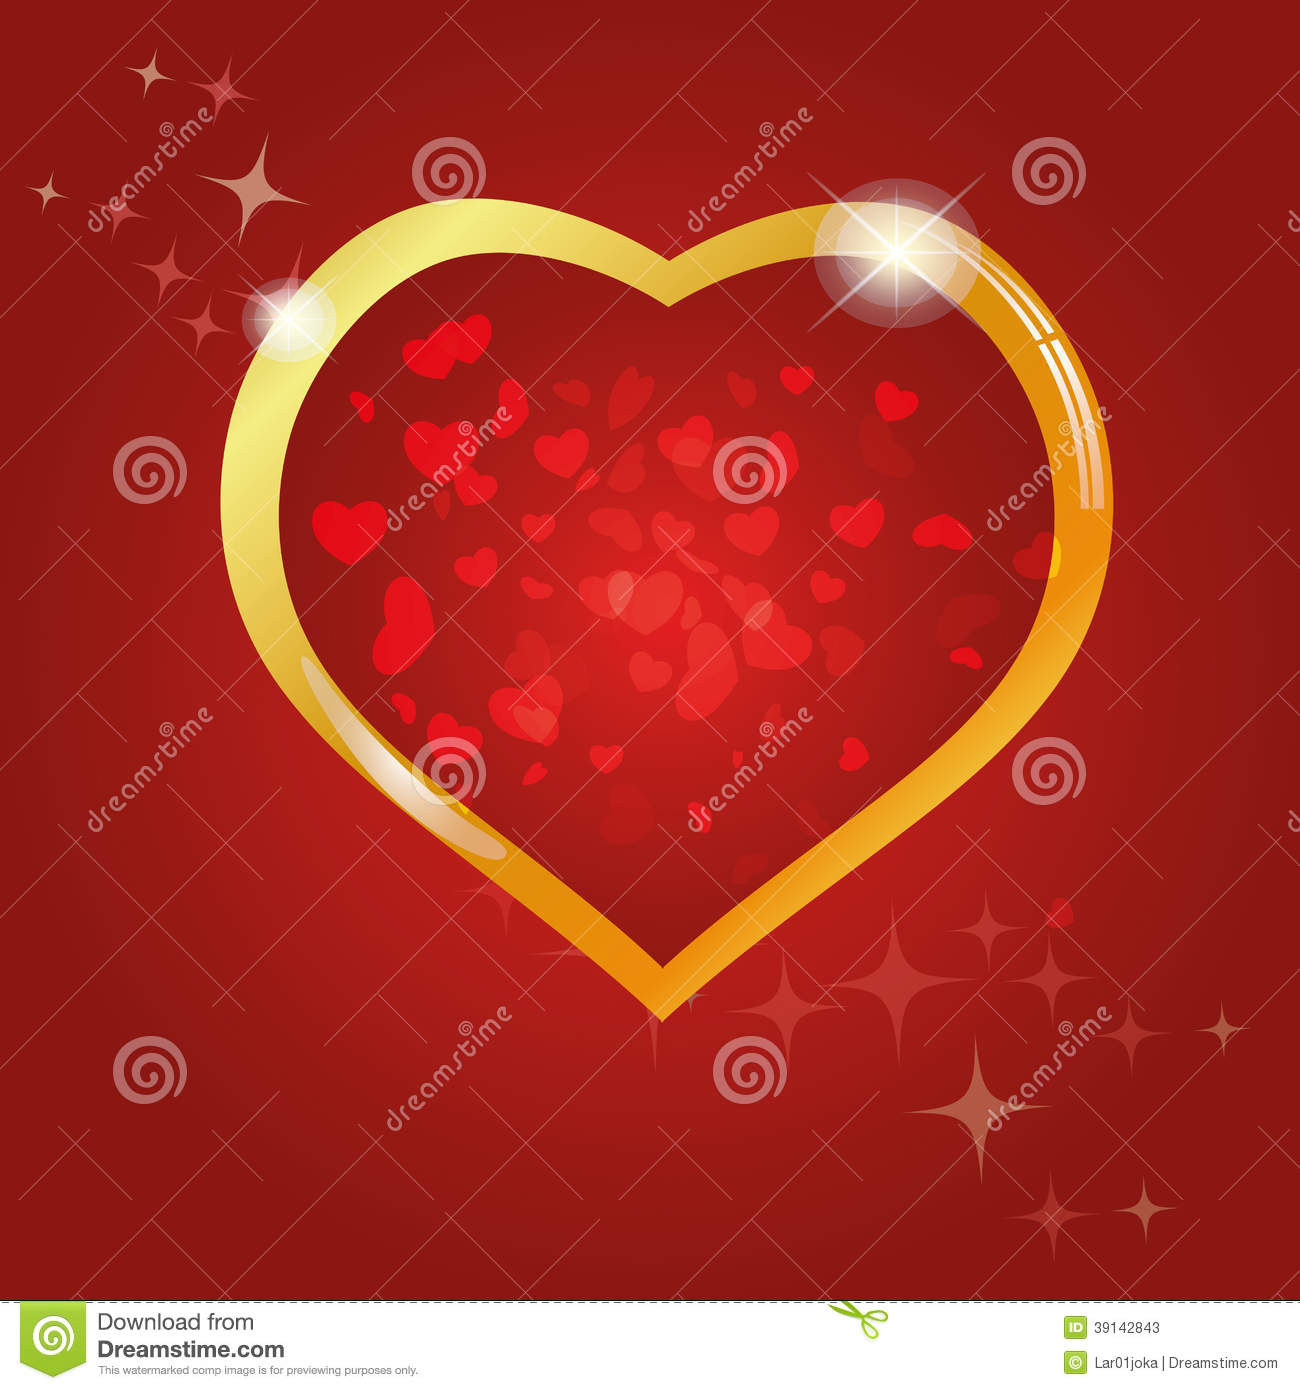 Red Heart With Golden Borders In Red Background For Valentine S Day